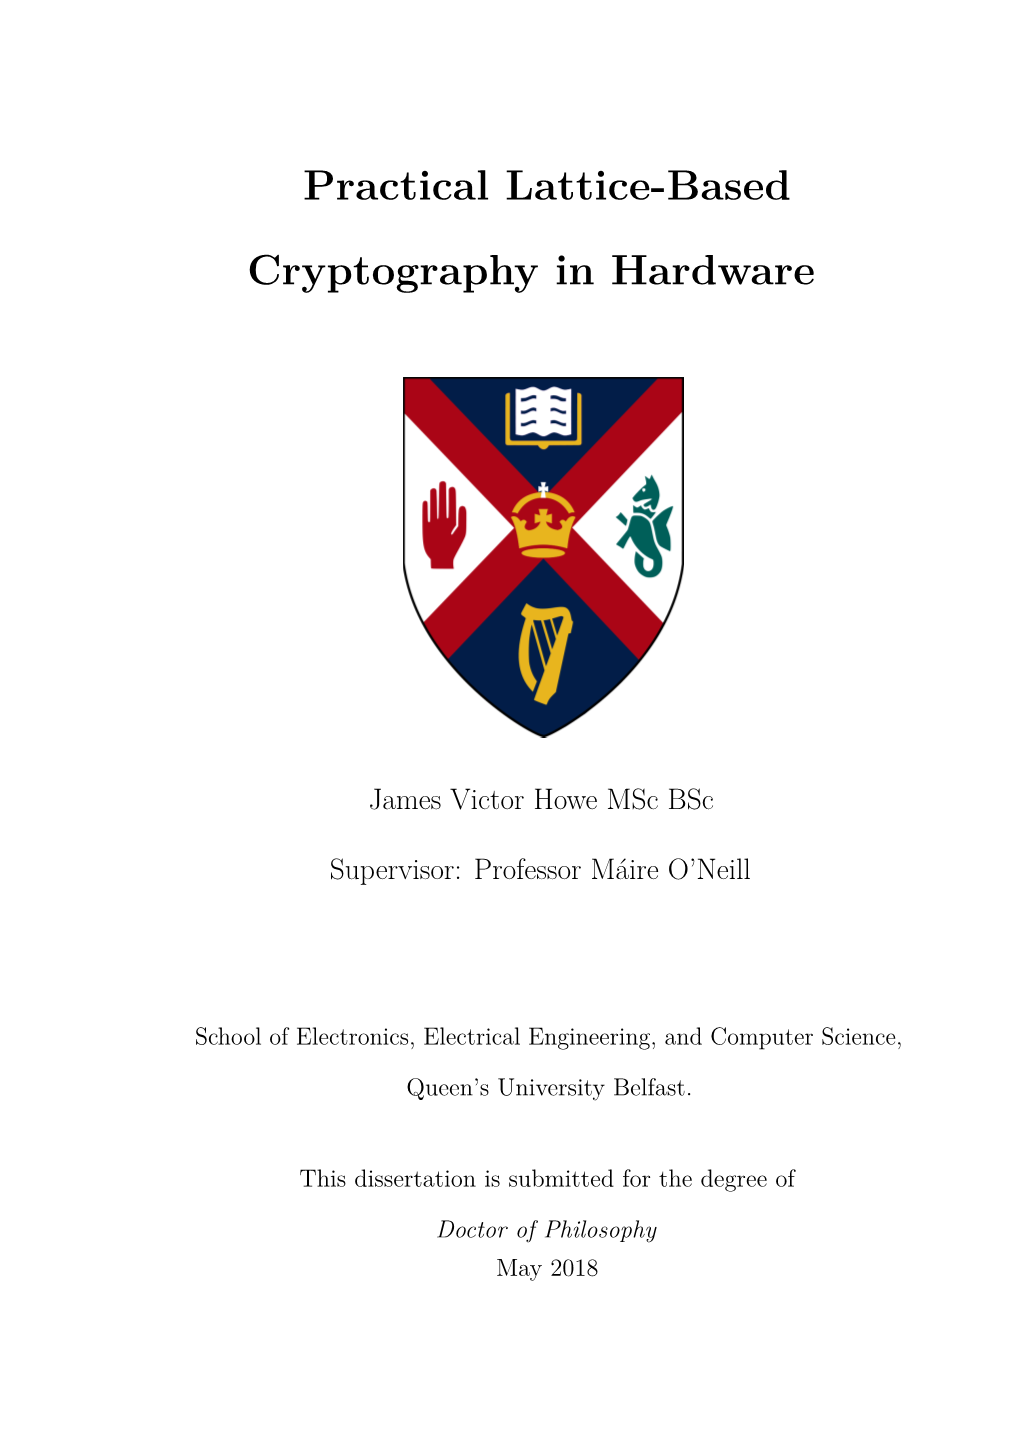 Practical Lattice-Based Cryptography in Hardware